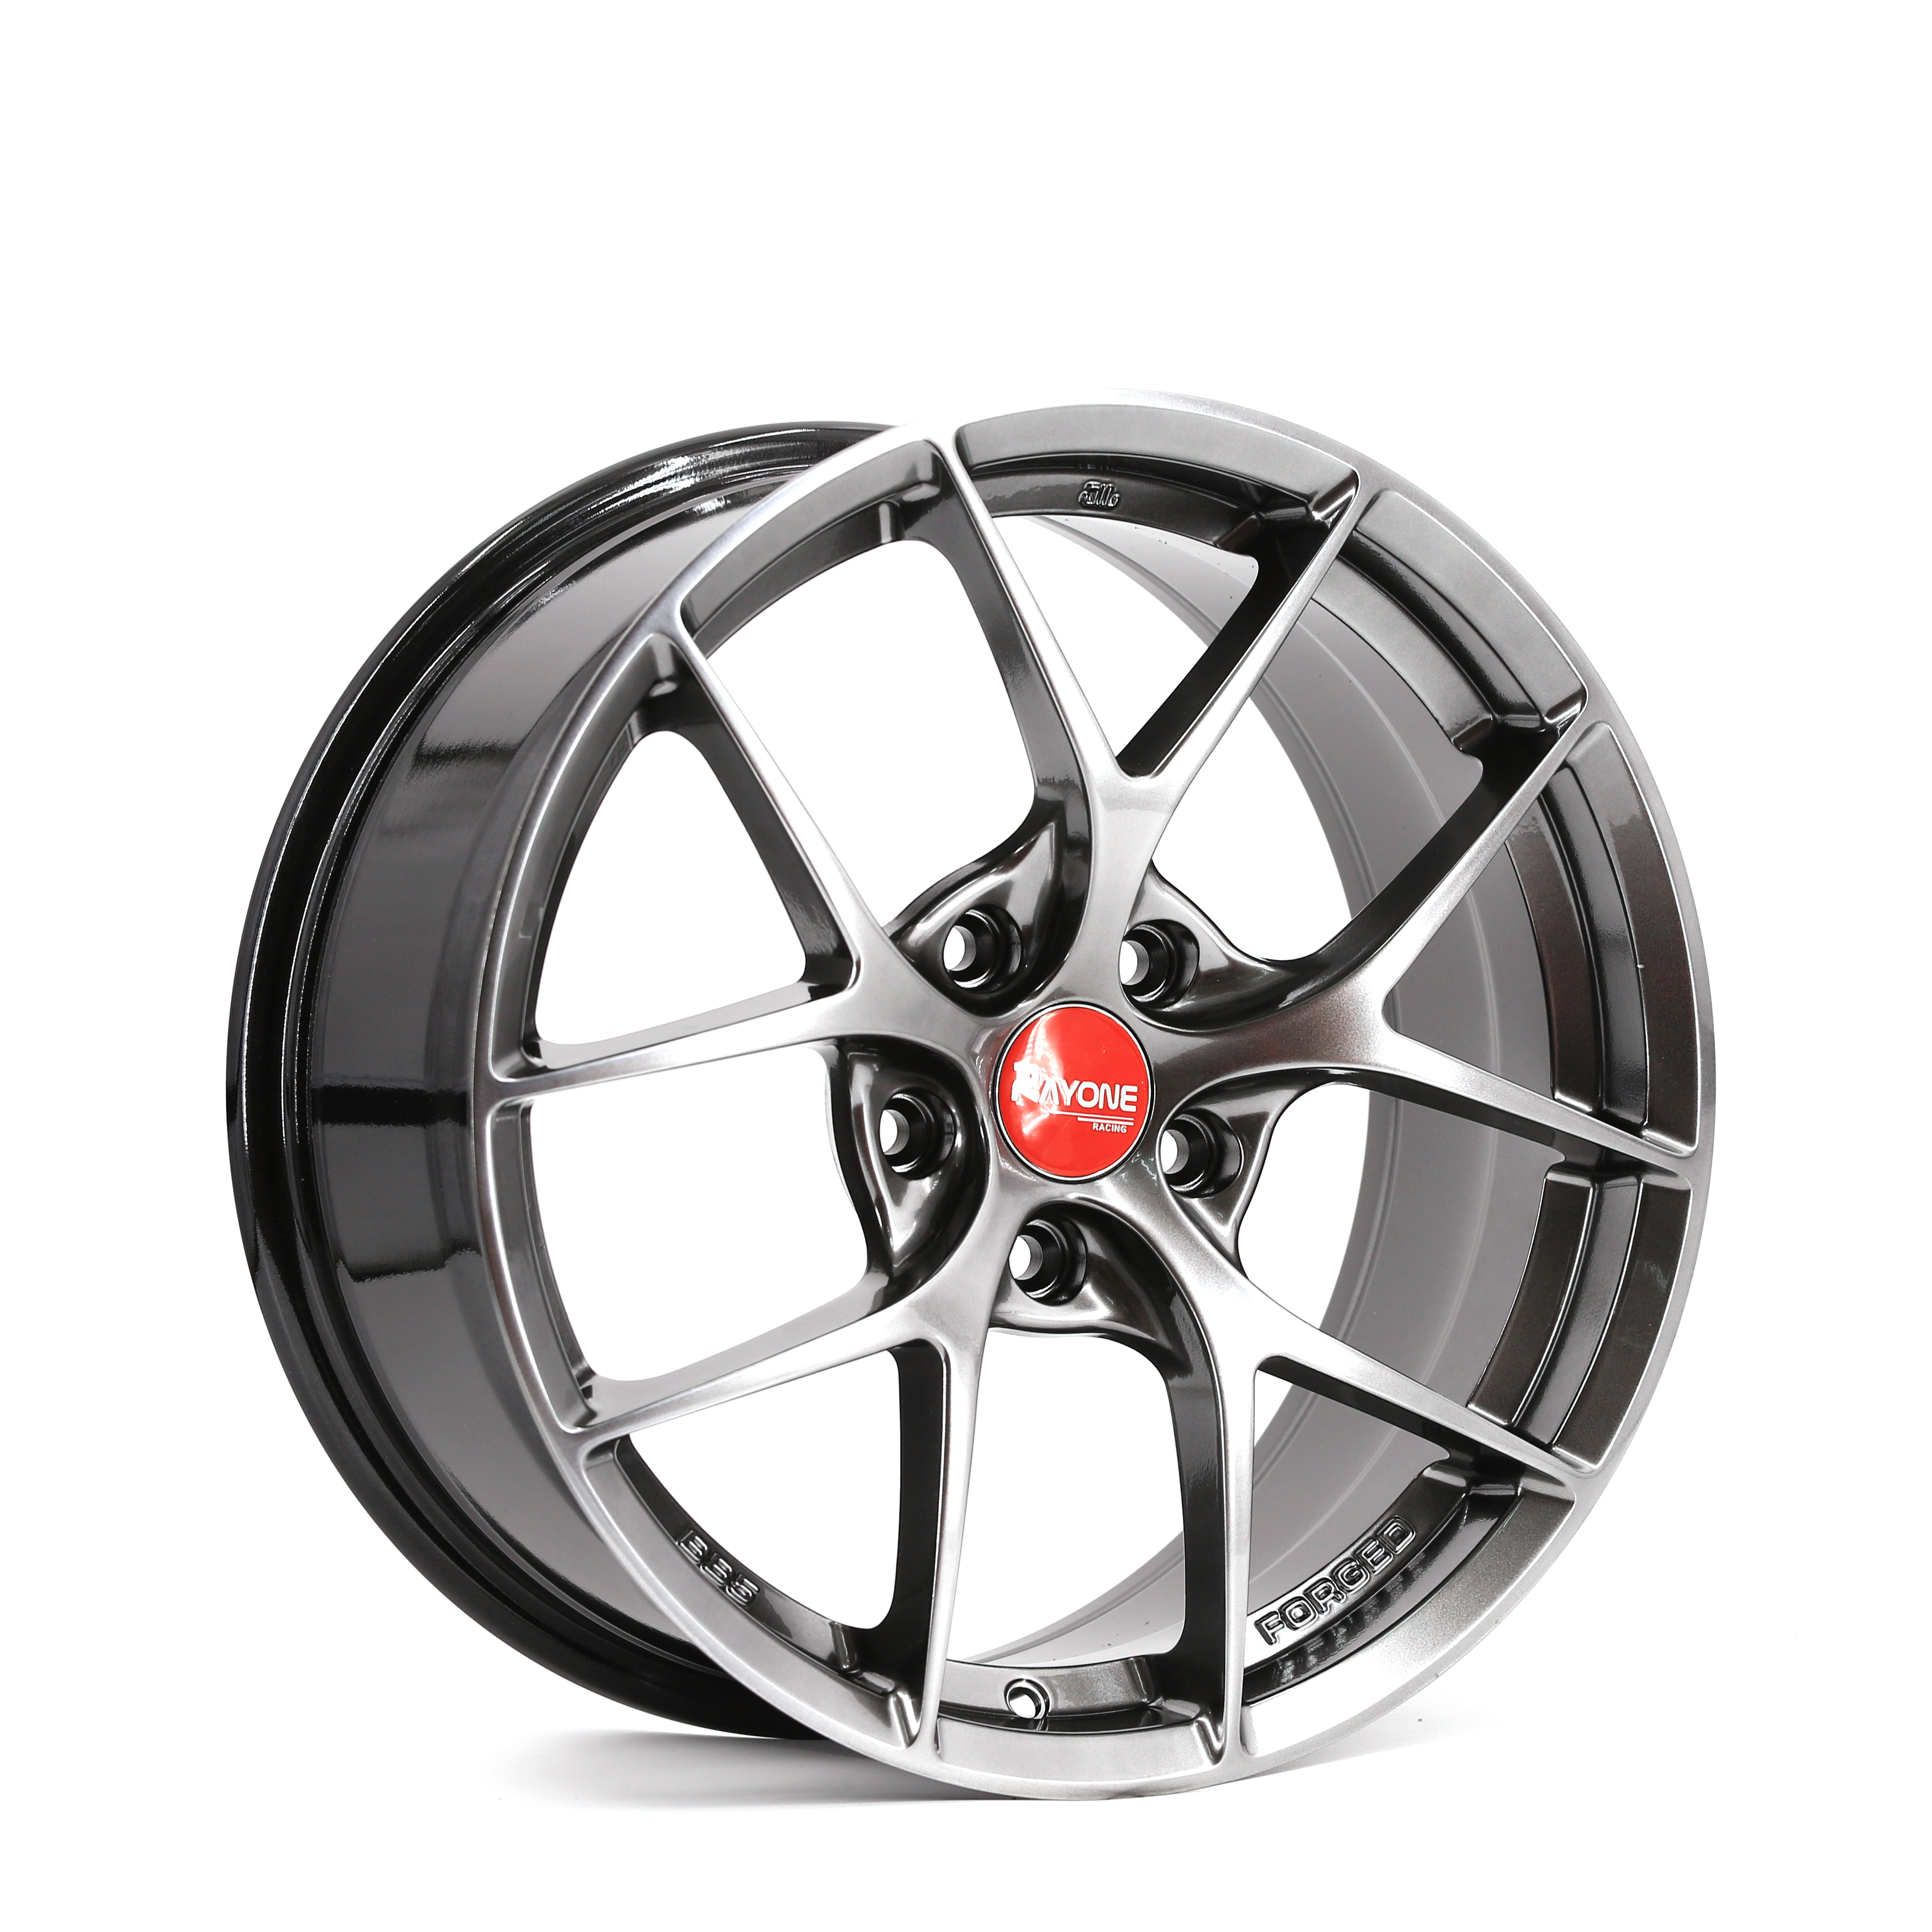 Cheapest Price Mustang Forged Wheels - Popular New Design OEM/ODM Car Alloy Wheels For Sedan And Sport Car – Rayone